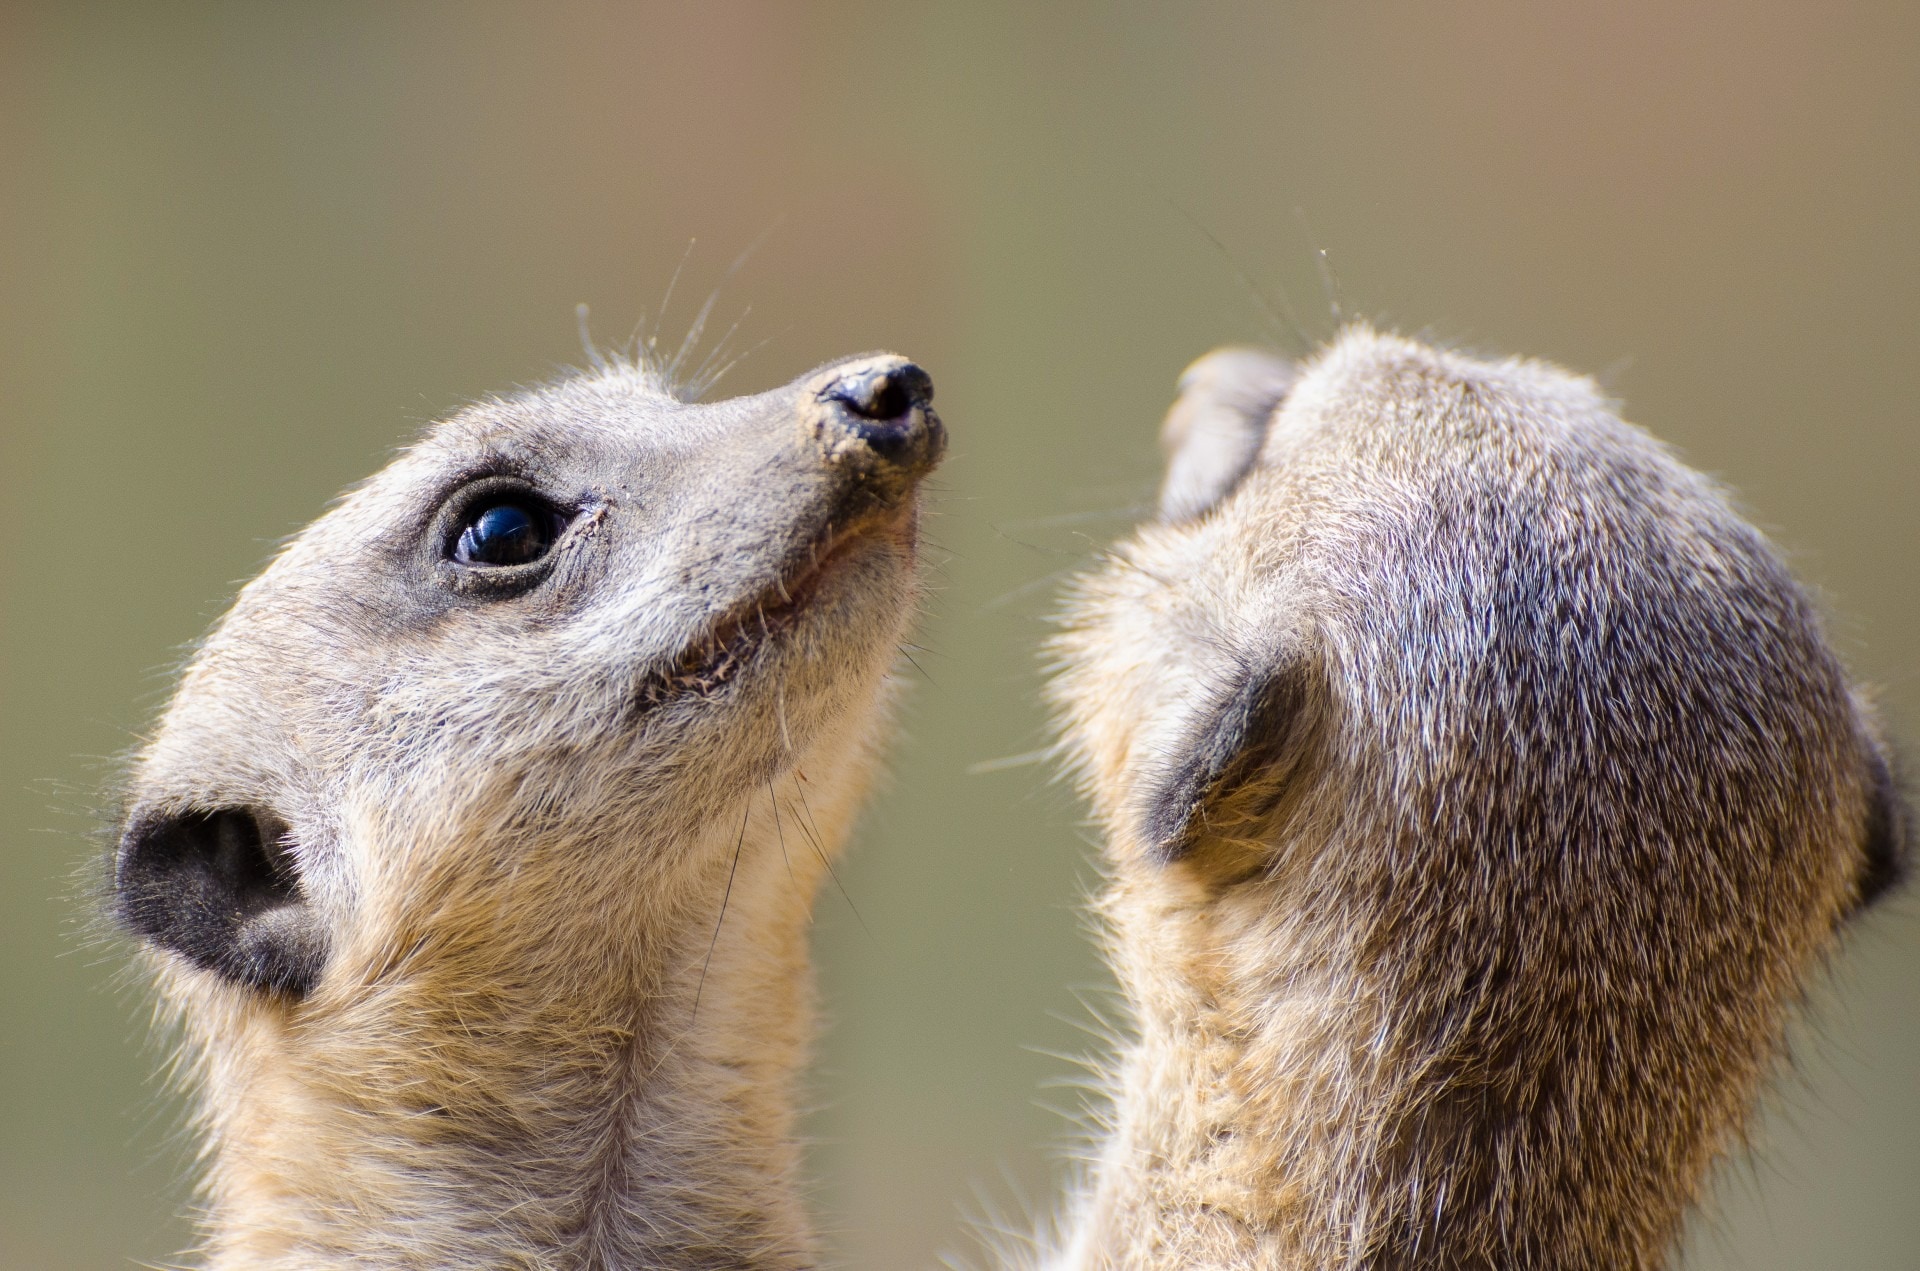 photo of two meerkat during daytime